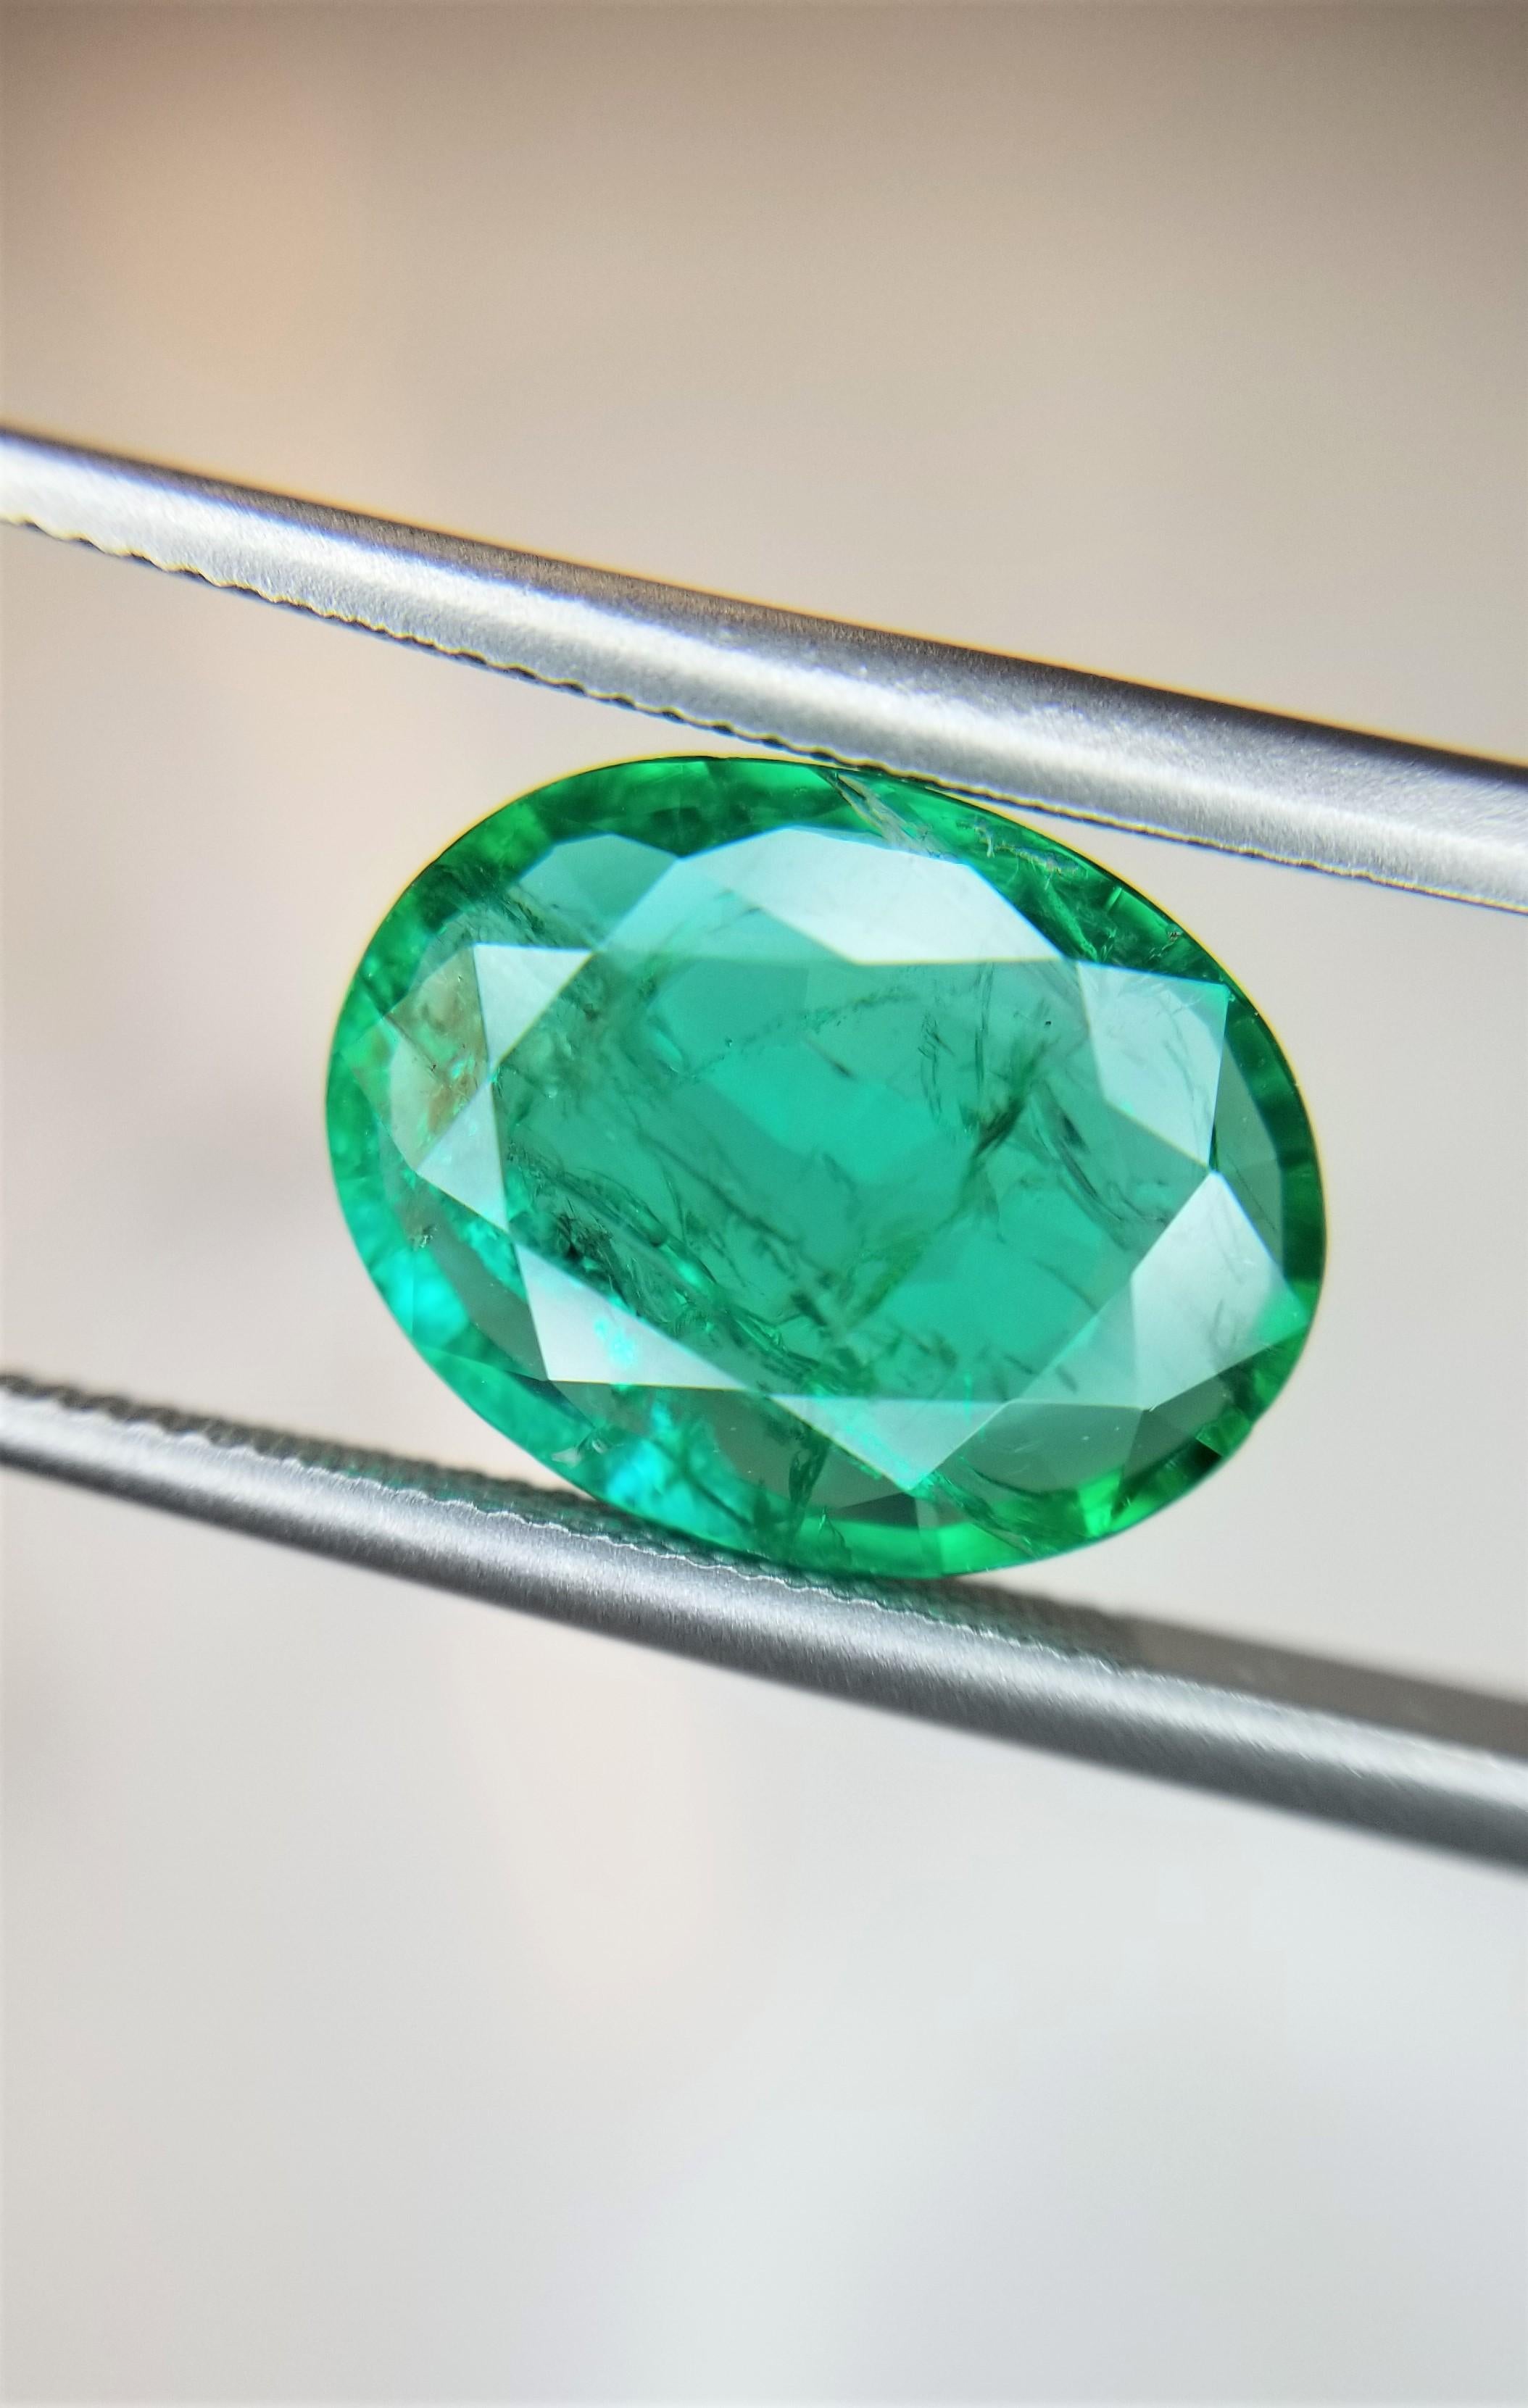 Contemporary 2.48 Ct Weight Oval Shaped Green Color IGITL Certified Emerald Gemstone Pendant For Sale